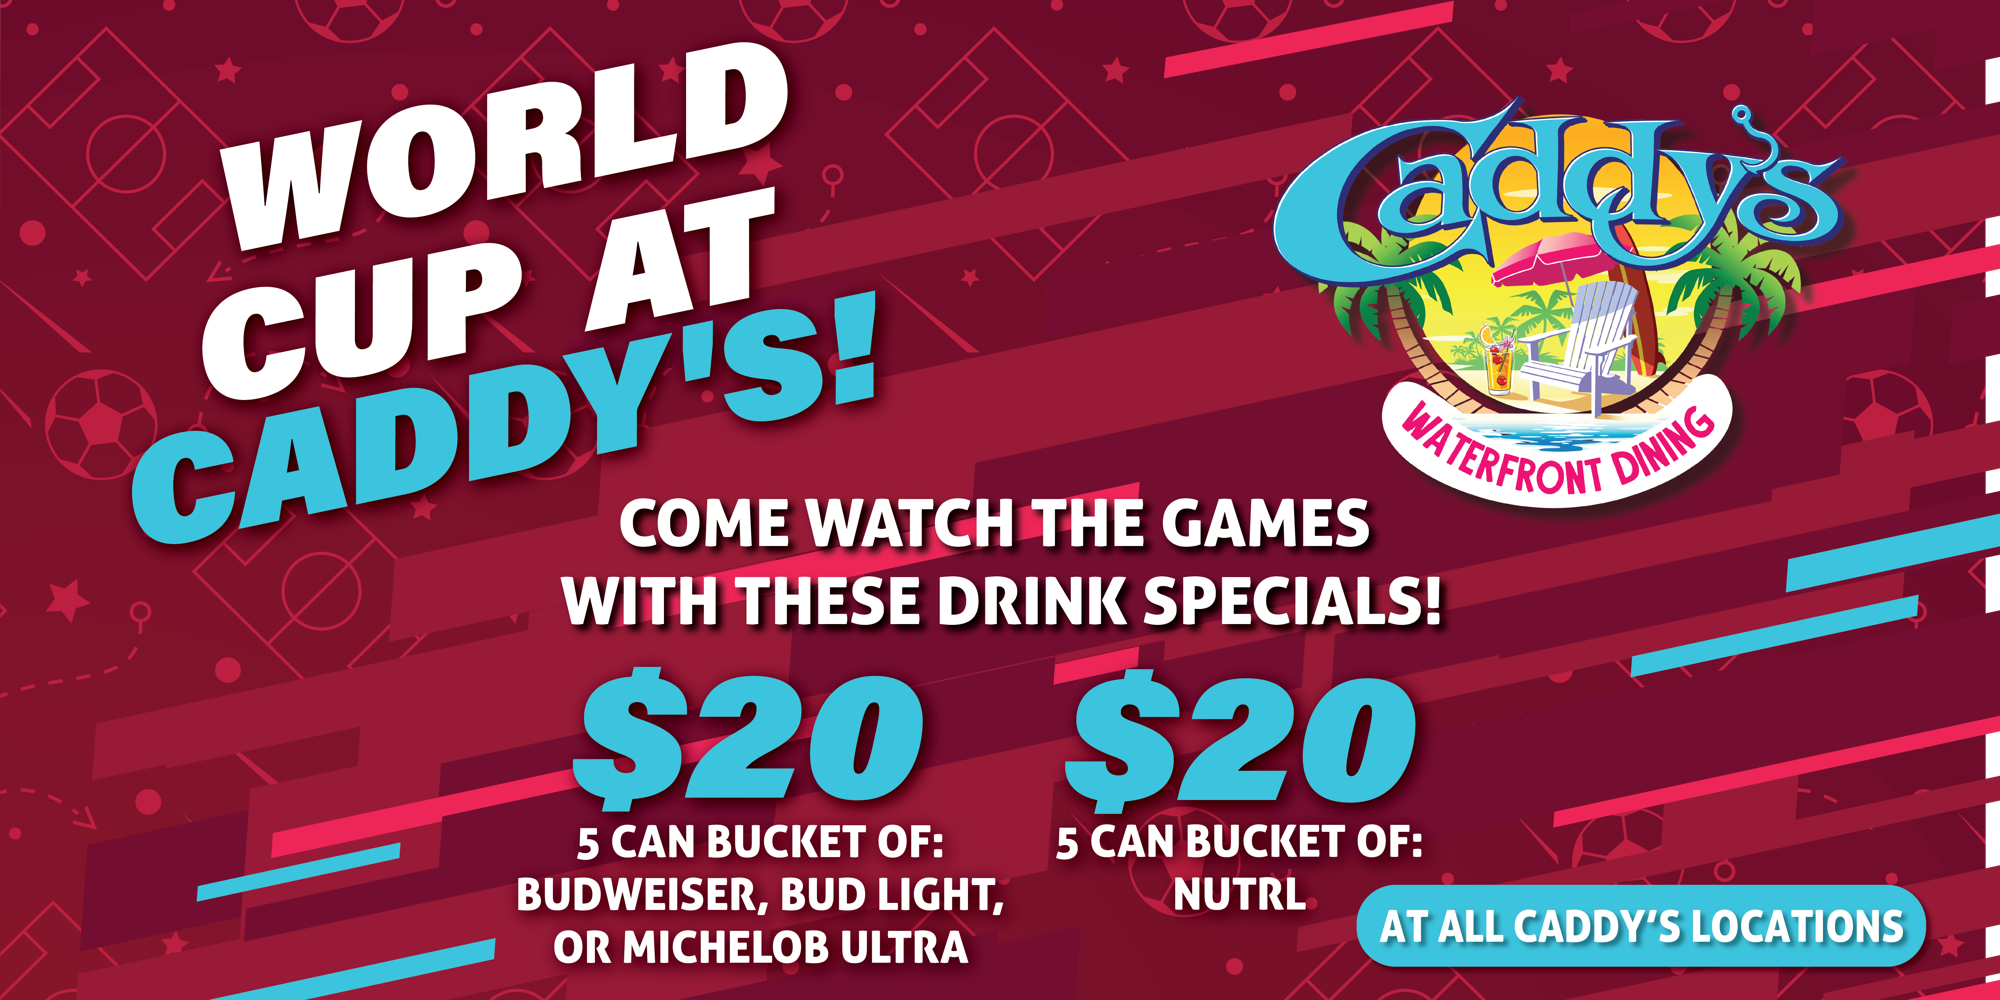 World Cup at Caddy’s! promotional image